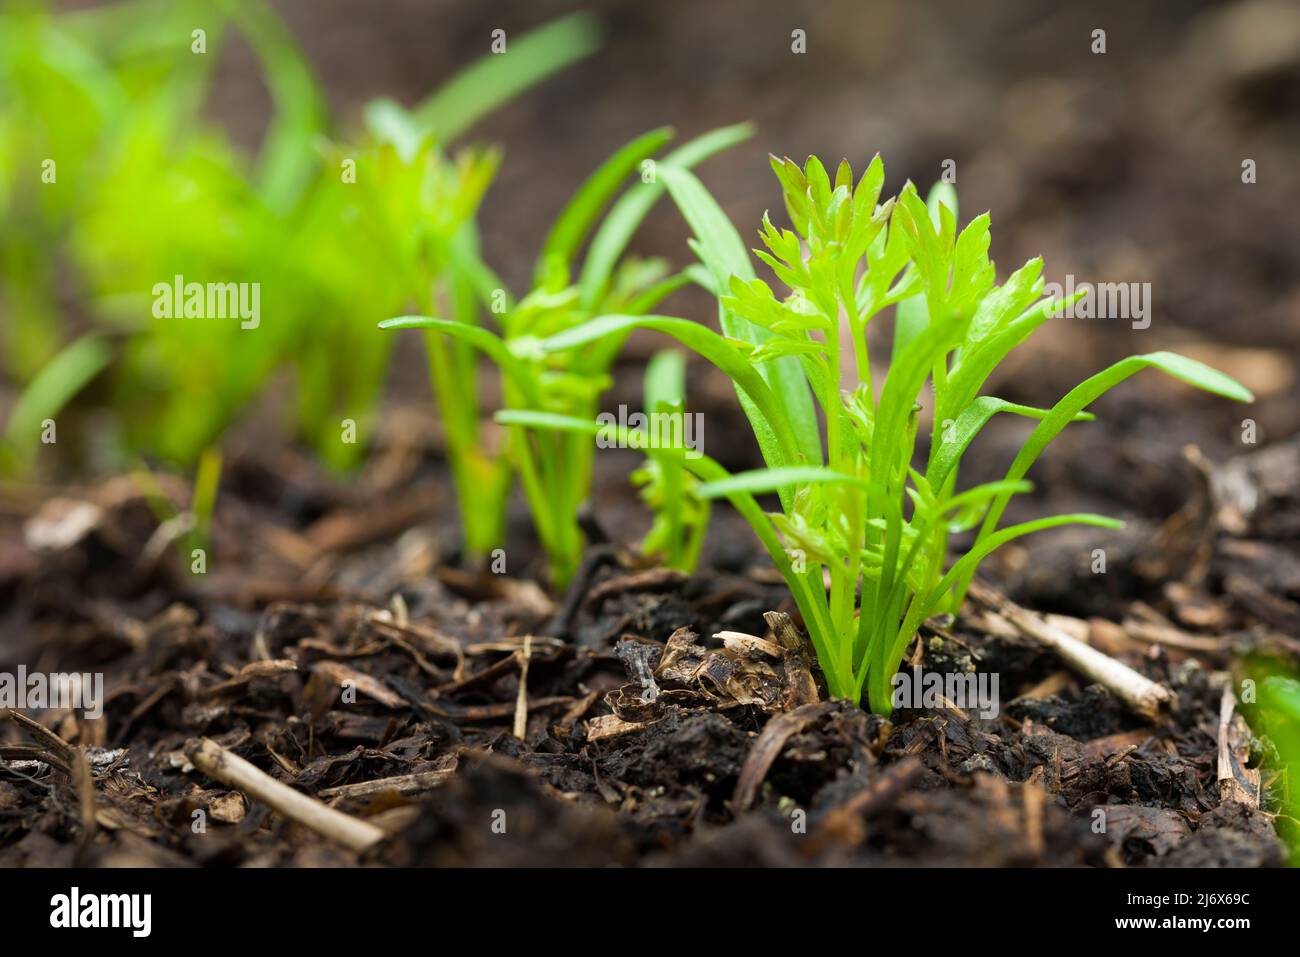 Carrot Resistafly F1 seedlings growing in a no-dig style vegetable garden in spring. Stock Photo